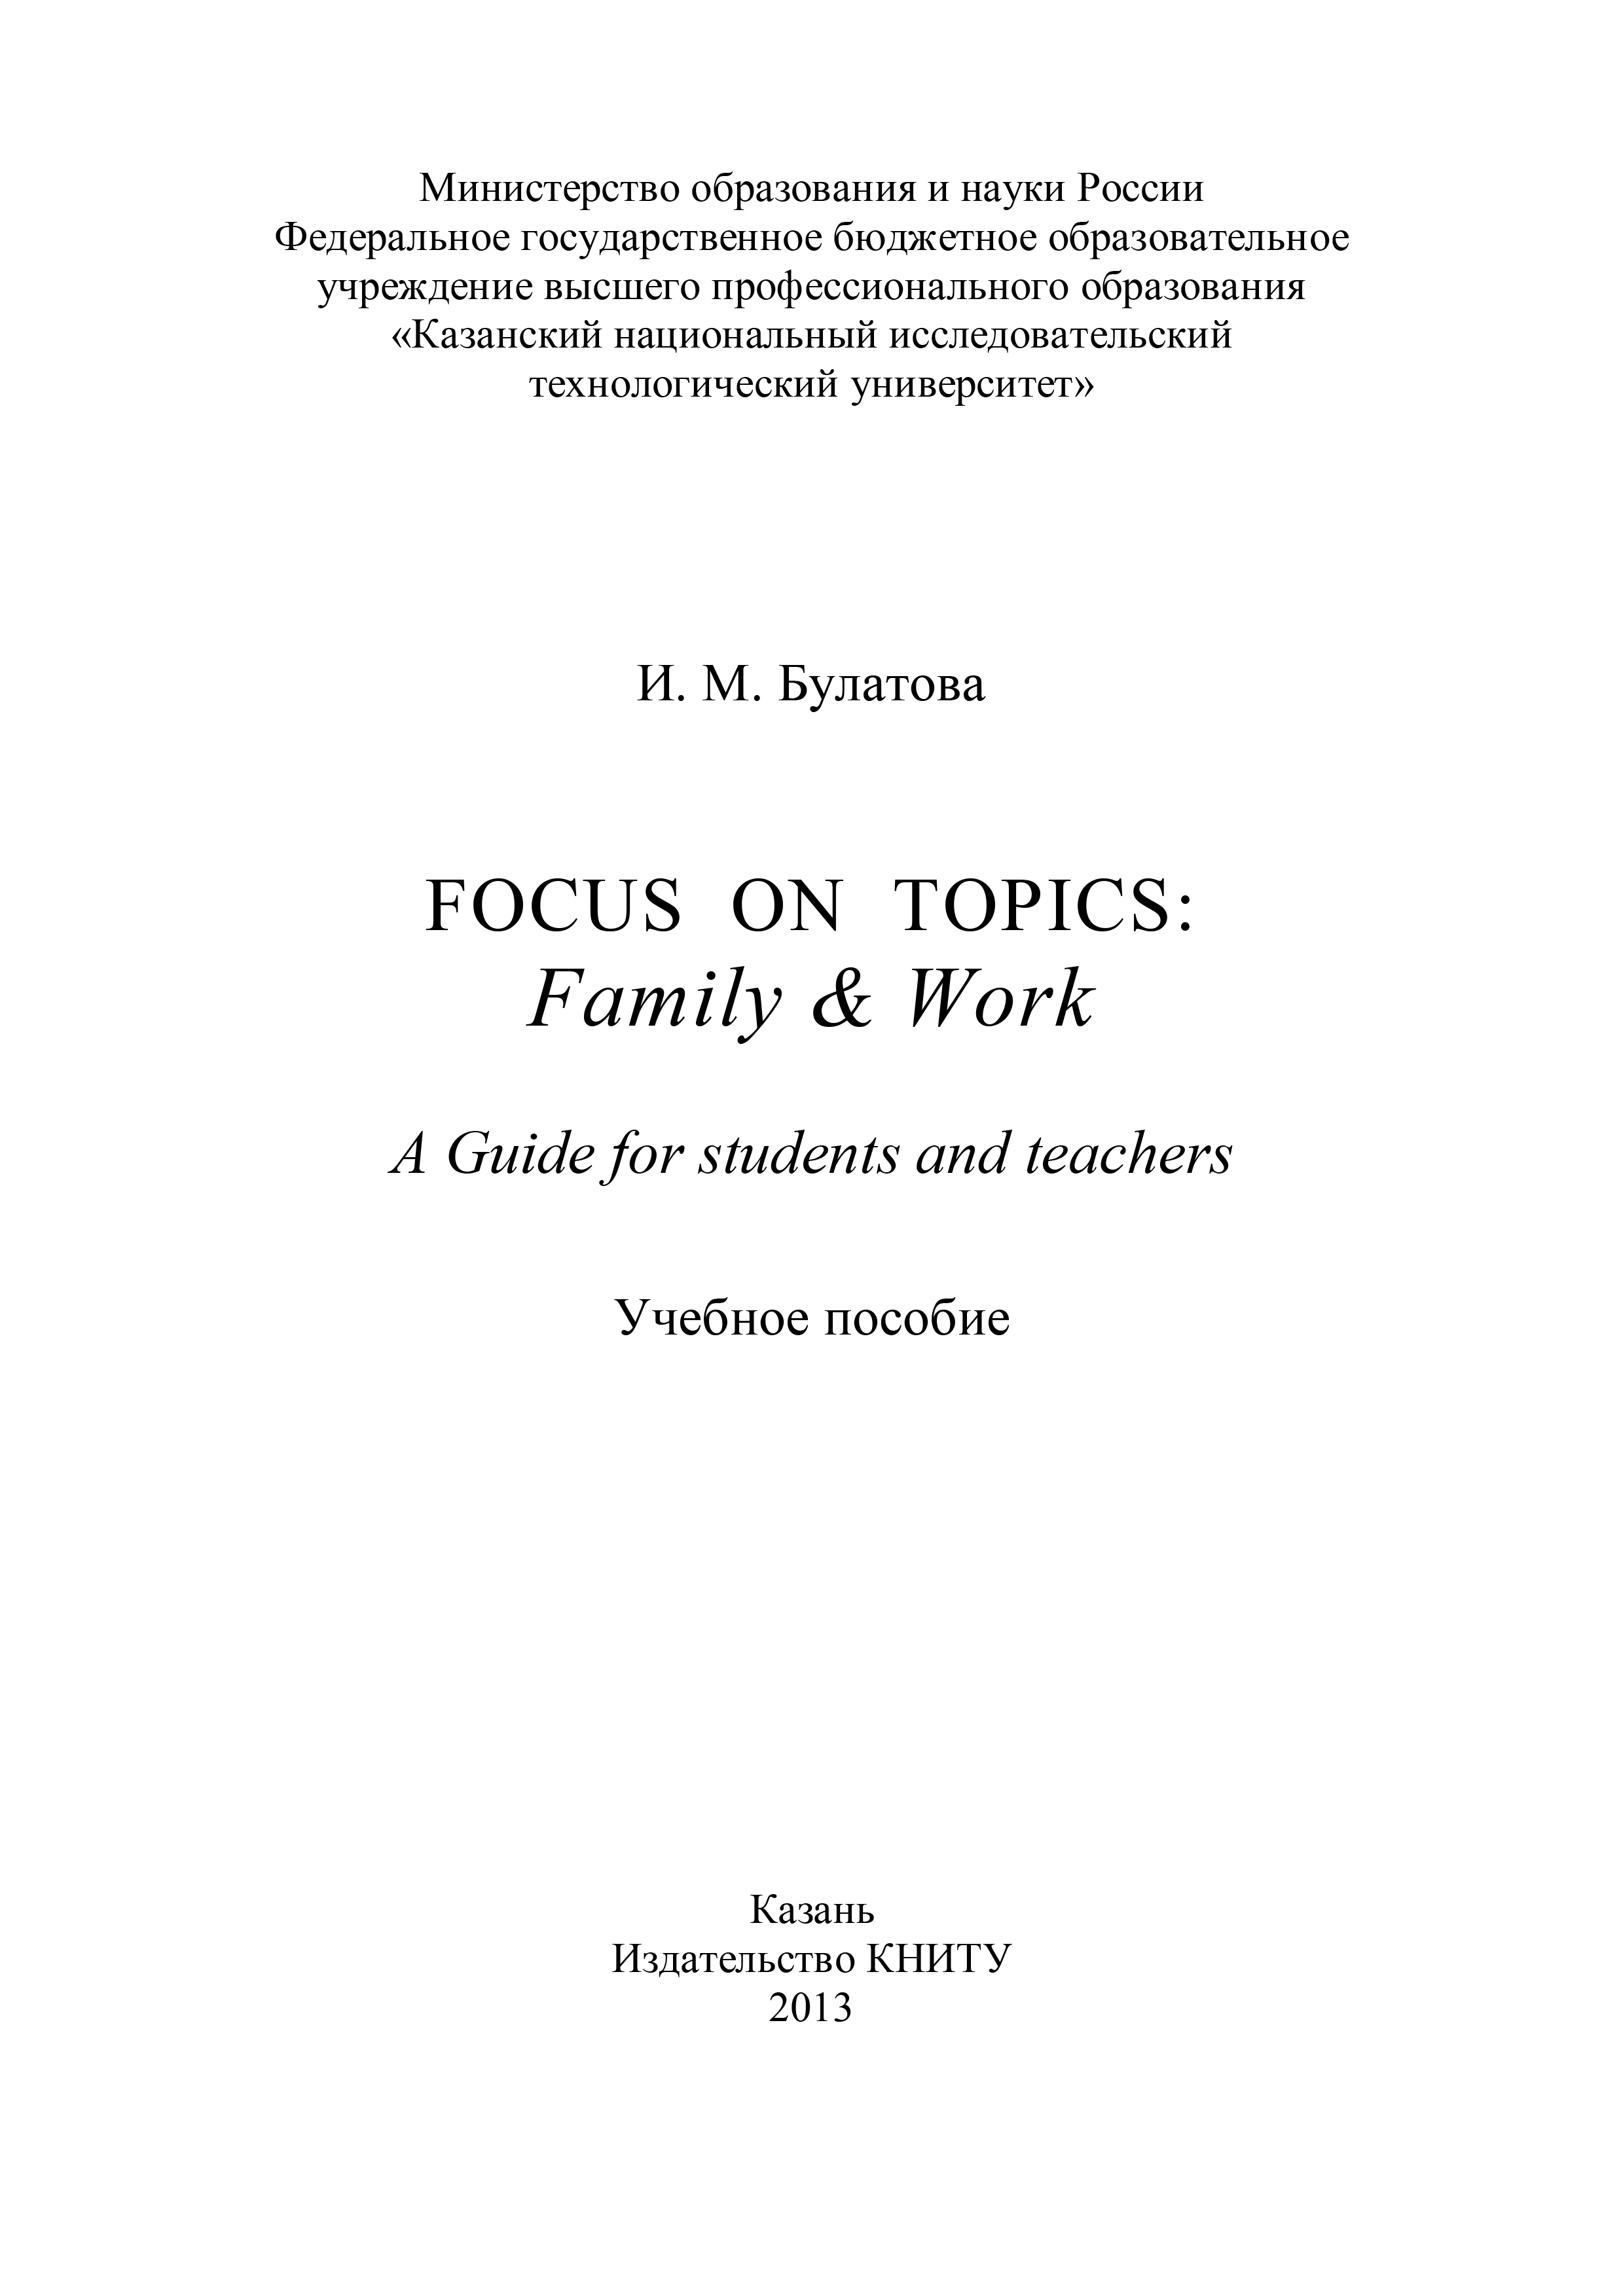 Focus on topics: Family&Work. A Guide for students and teachers